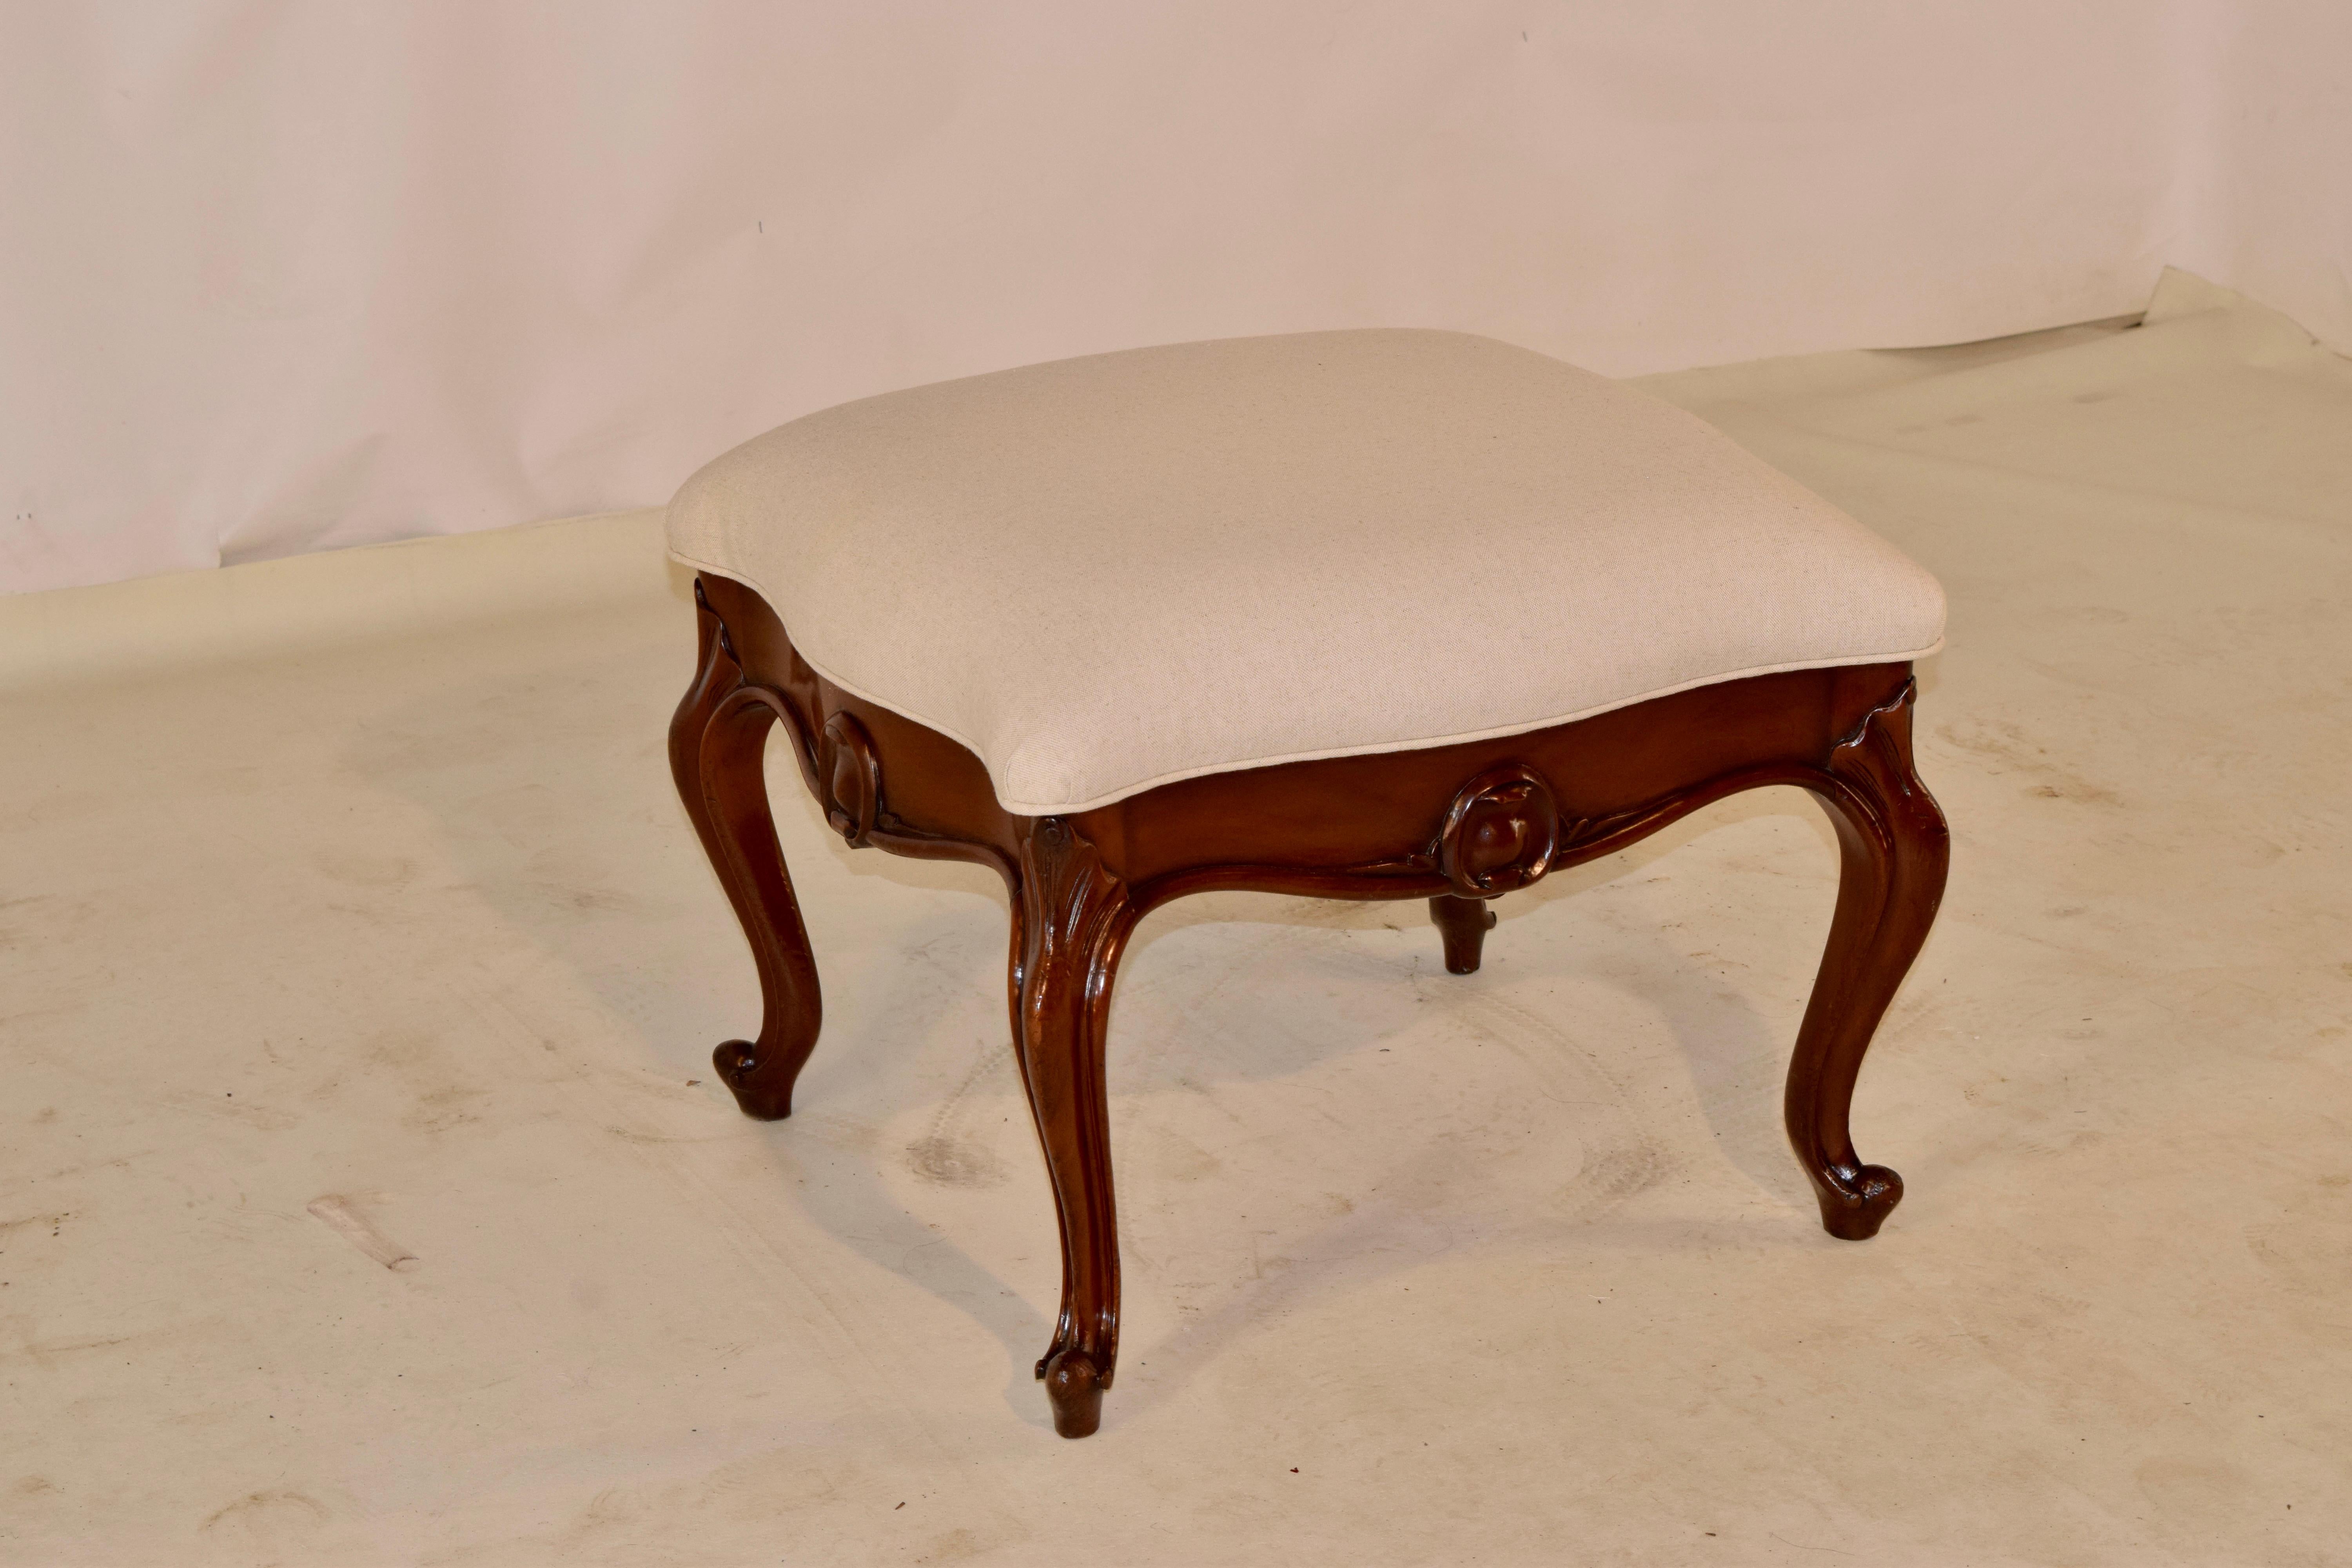 19th Century English lift top ottoman made from mahogany. The frame is serpentine shaped and has wonderfully hand-carved shells on the knees following down to the cabriole legs. The aprons also are decorated with hand carving and routed edges. The